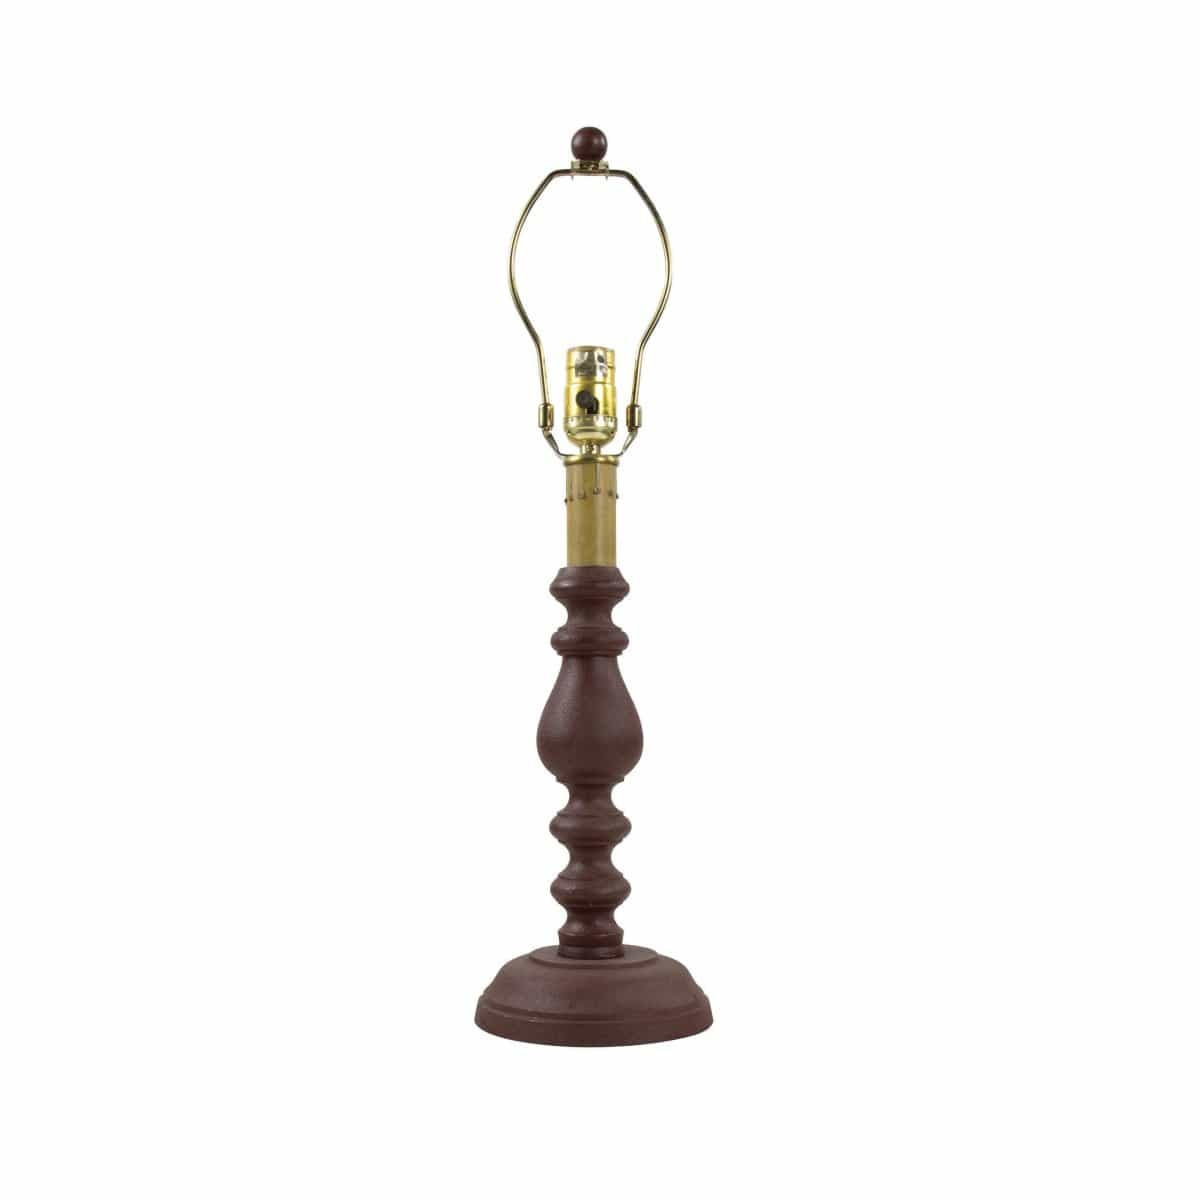 Candlestick Red Table Lamp 23&quot; High-Park Designs-The Village Merchant